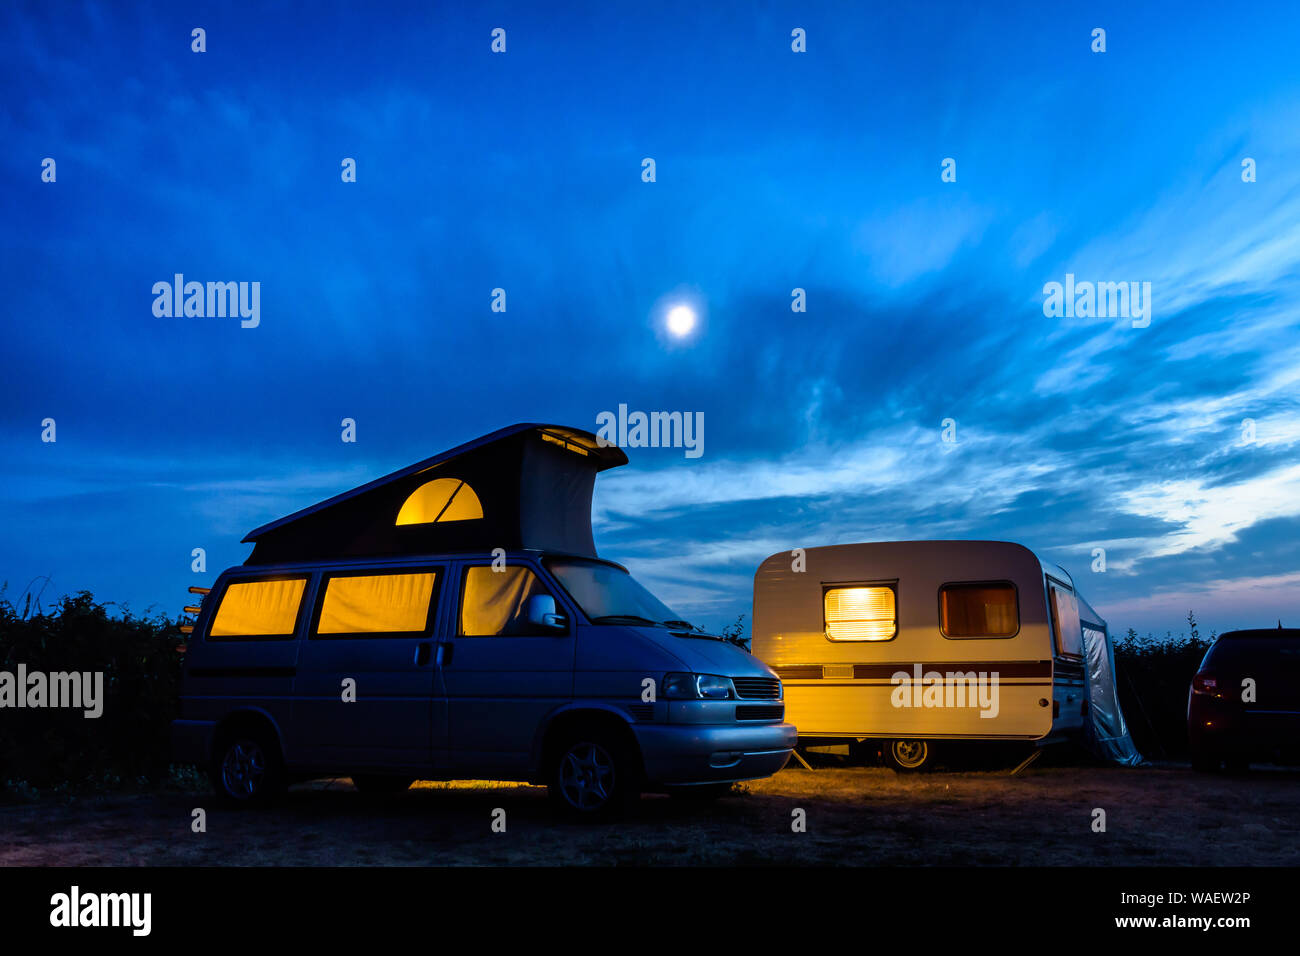 A small camper van parked next to a vintage caravan in a campsite, both illuminated from inside at nightfall with the moon glowing in a stormy sky. Stock Photo